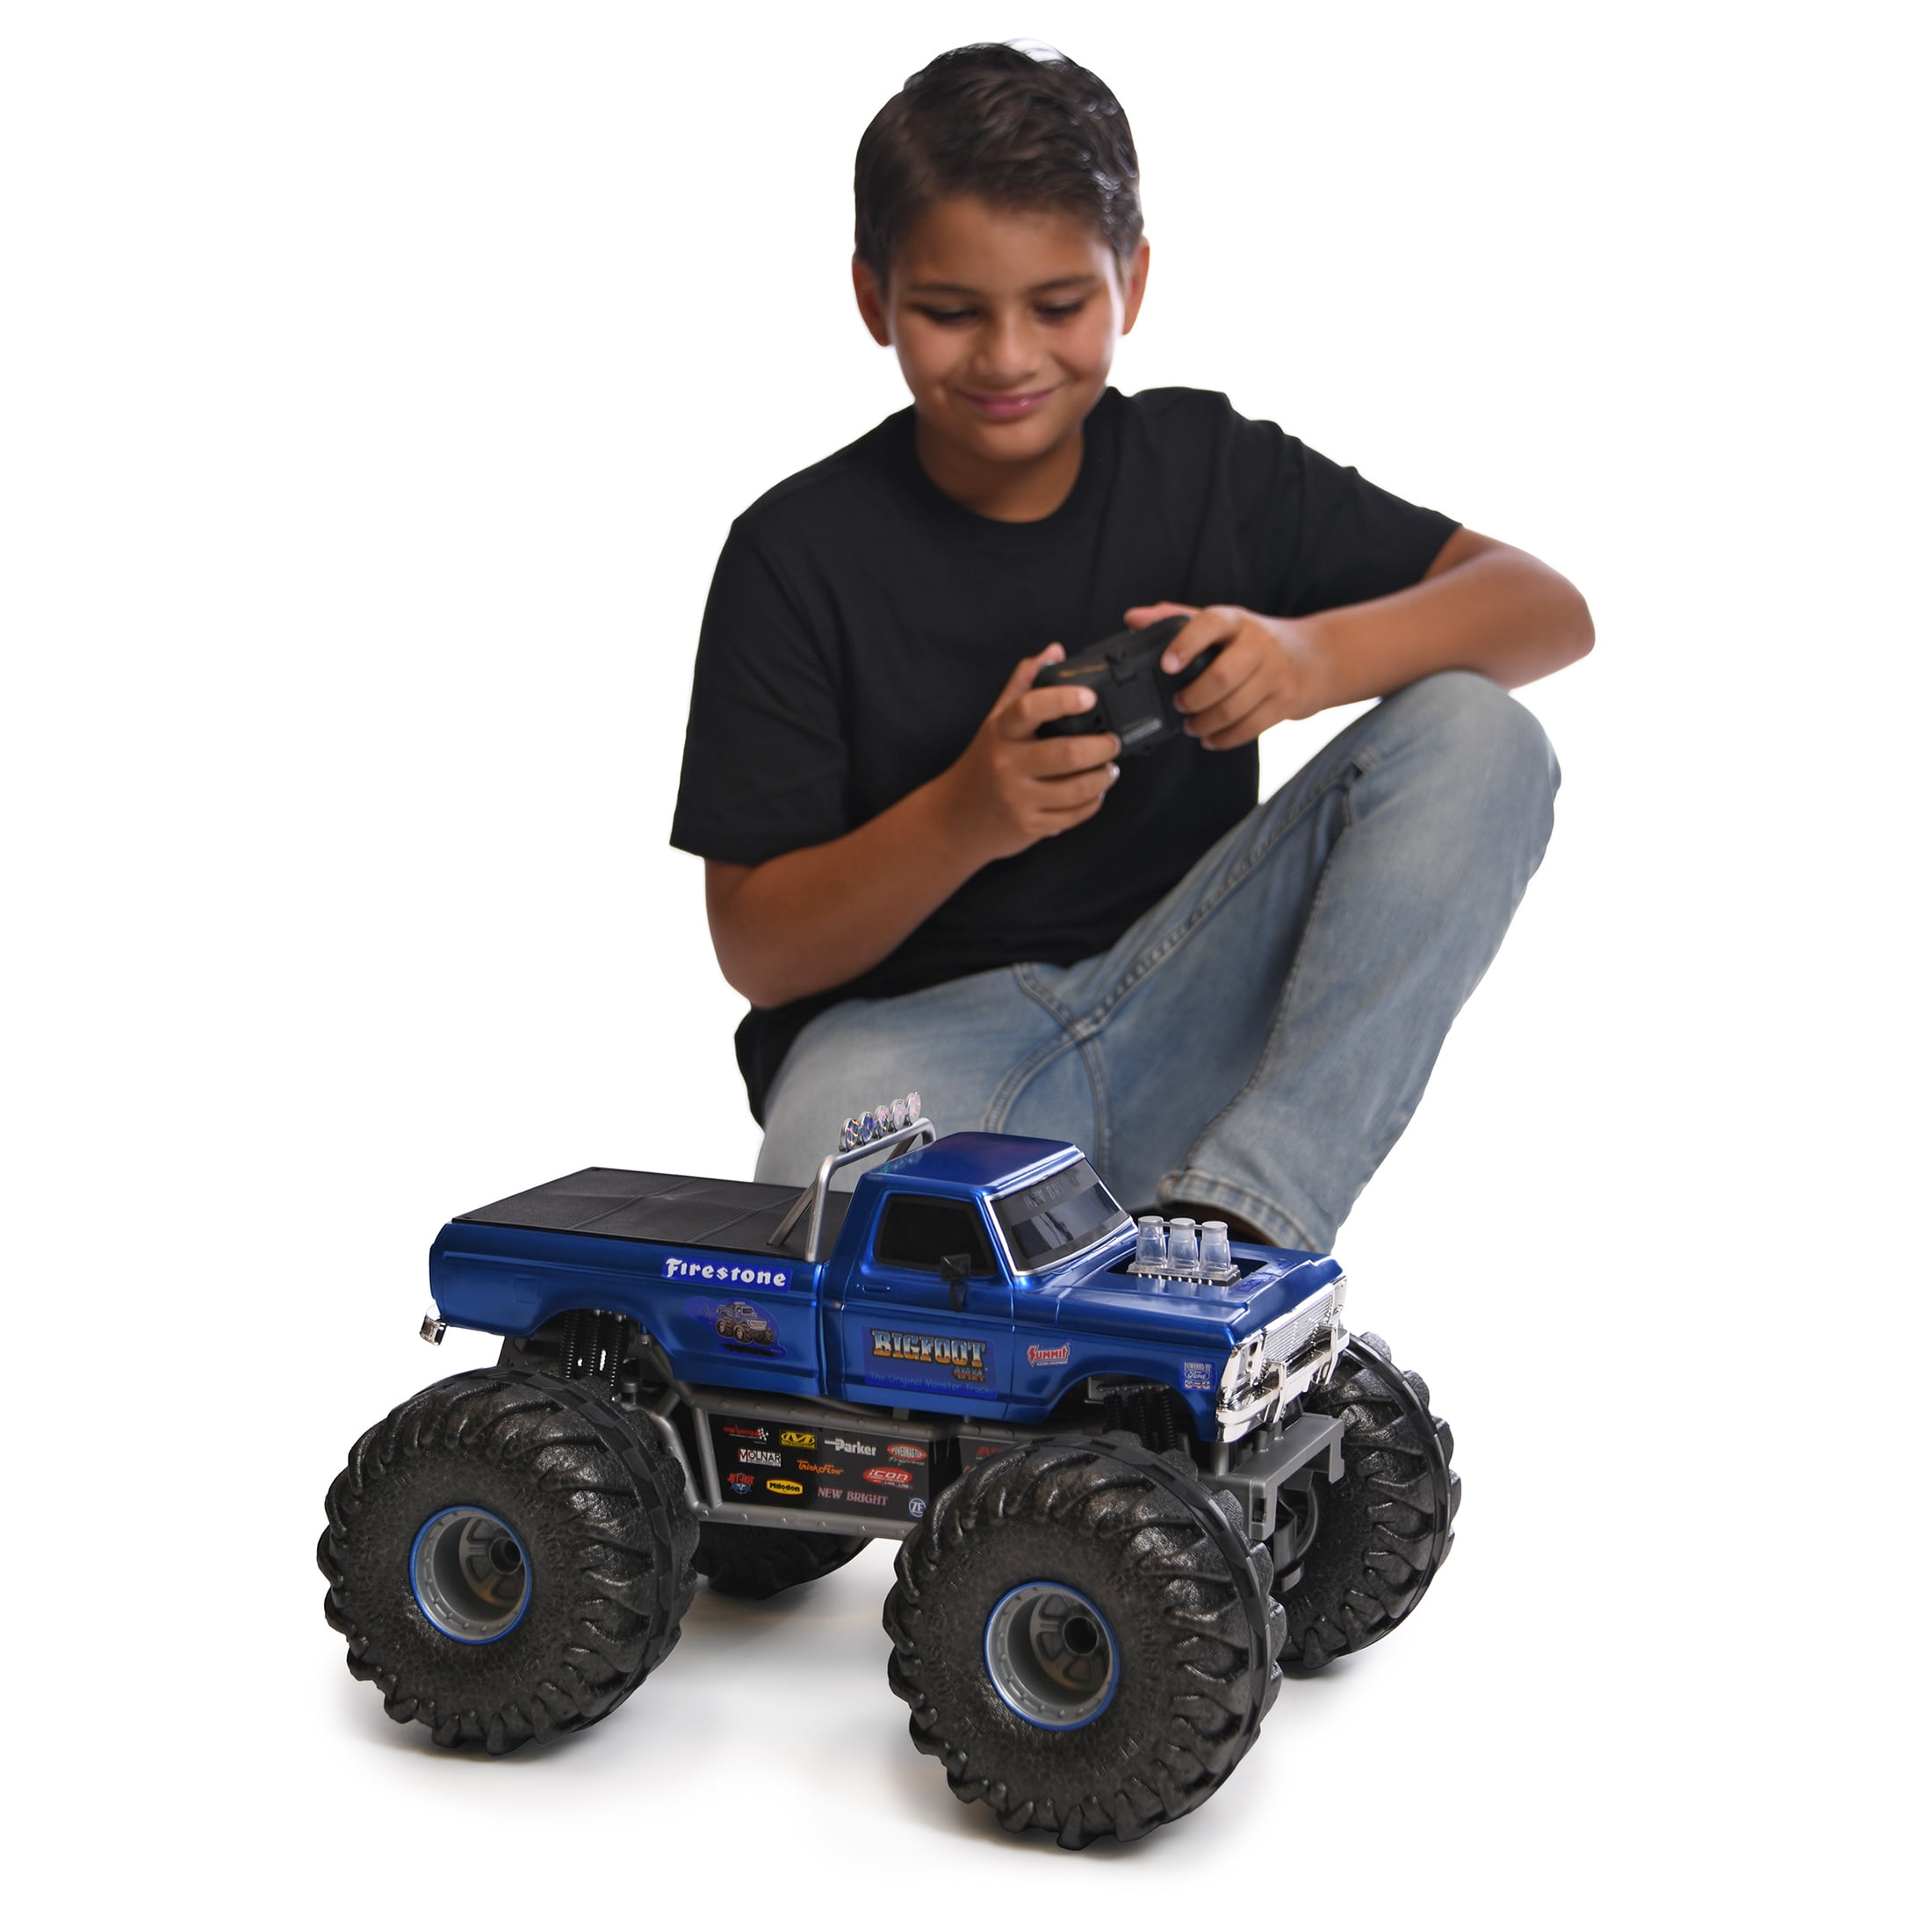 New Bright (1:10) Bigfoot Battery Radio Control Monster Truck with Lights and Sounds, 61086UEP - 2